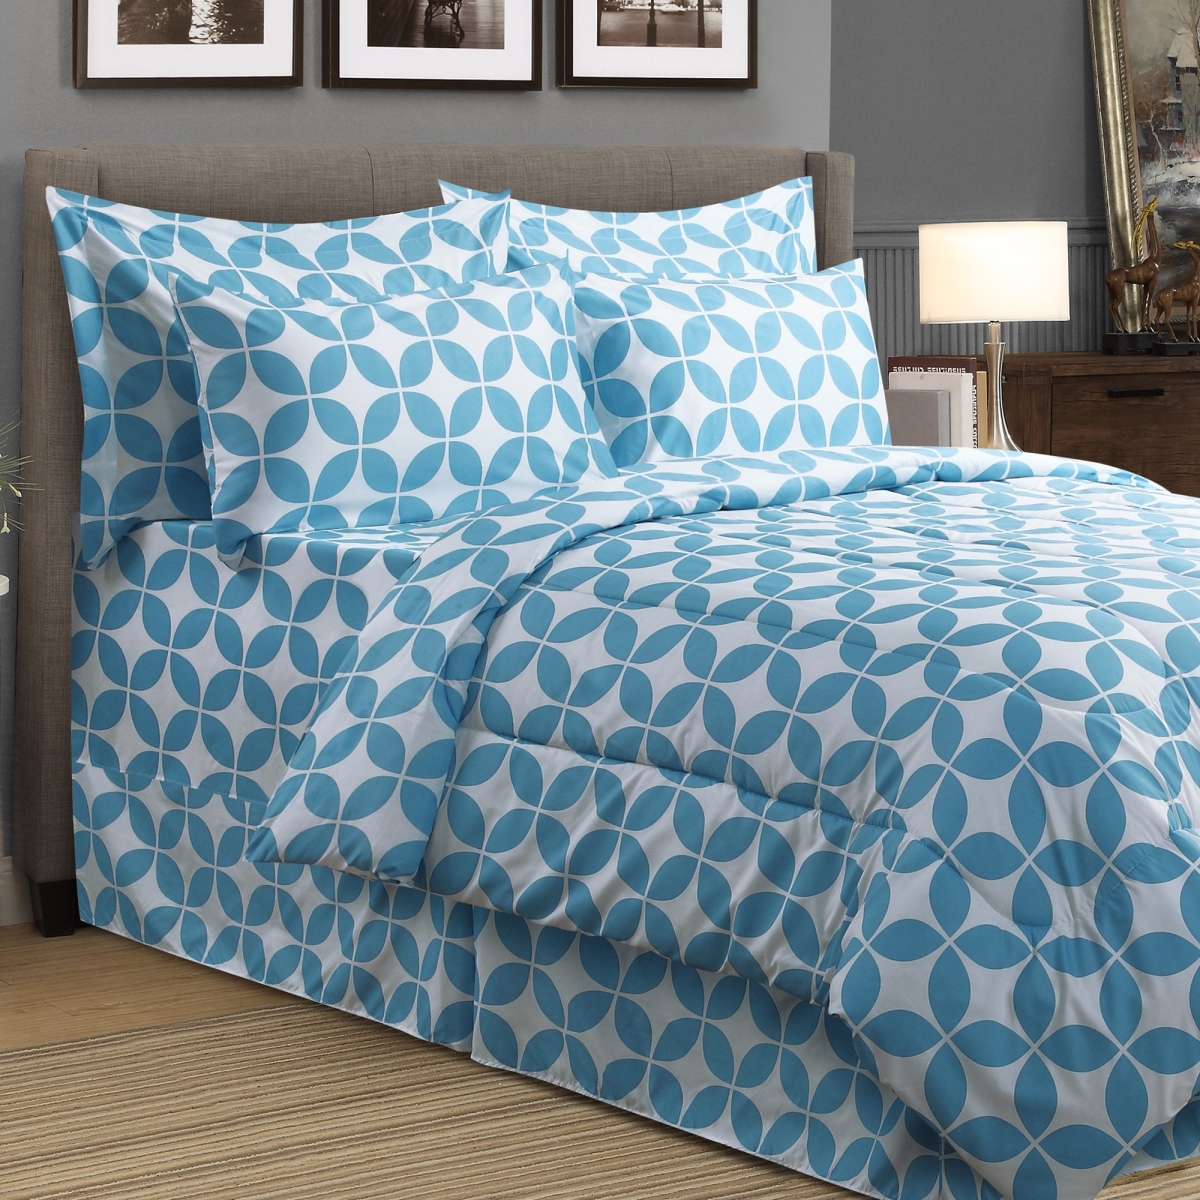 Sq-fe-addis-d08 8 Piece Addison Bed In A Bag Comforter Set - Double Size